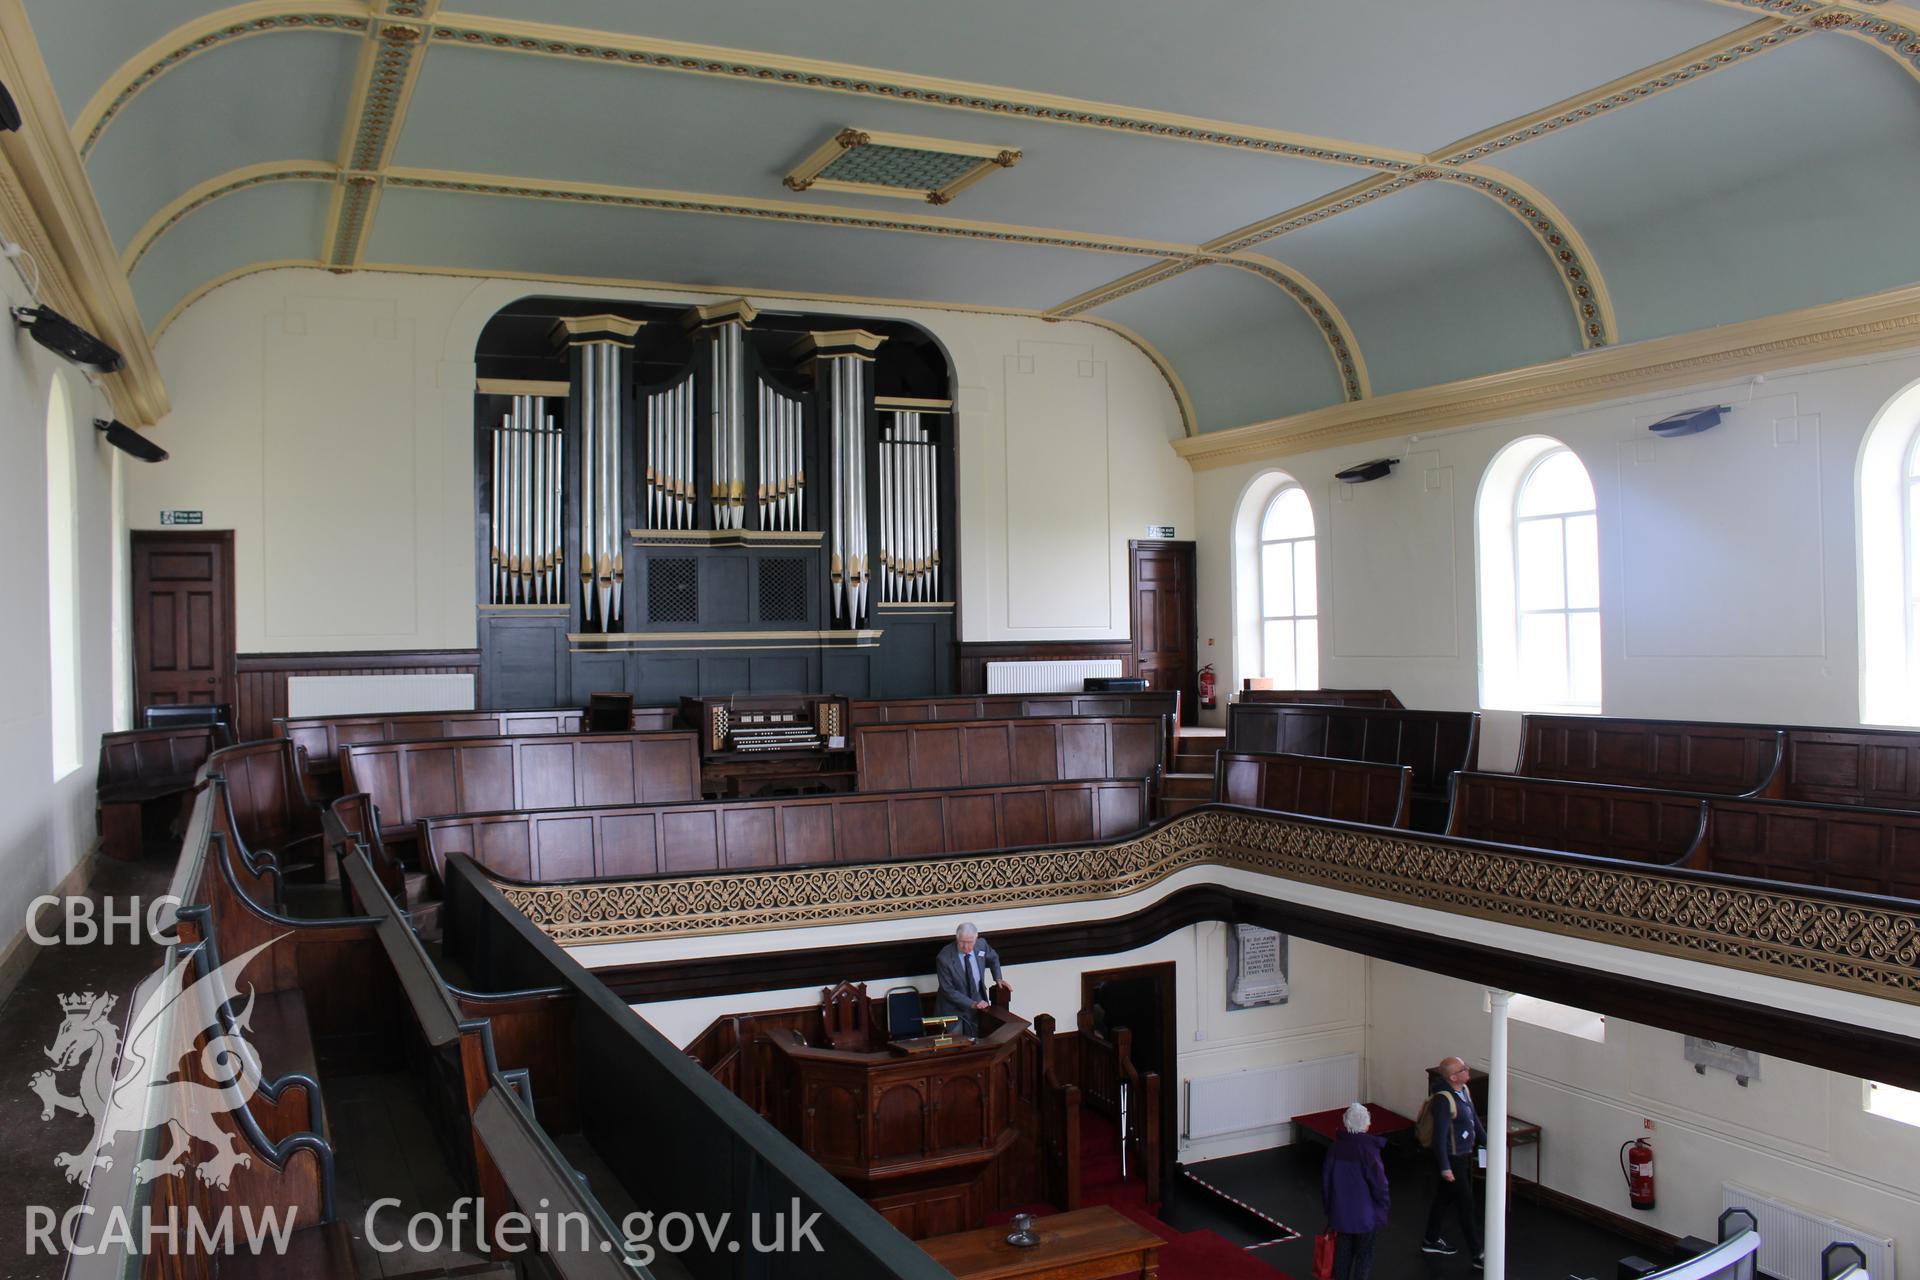 Colour photograph showing interior view looking from first floor balcony towards organ at Mynydd-Bach Independent Chapel, Treboeth, Swansea. Taken during photographic survey conducted by Sue Fielding on 13th May 2017.